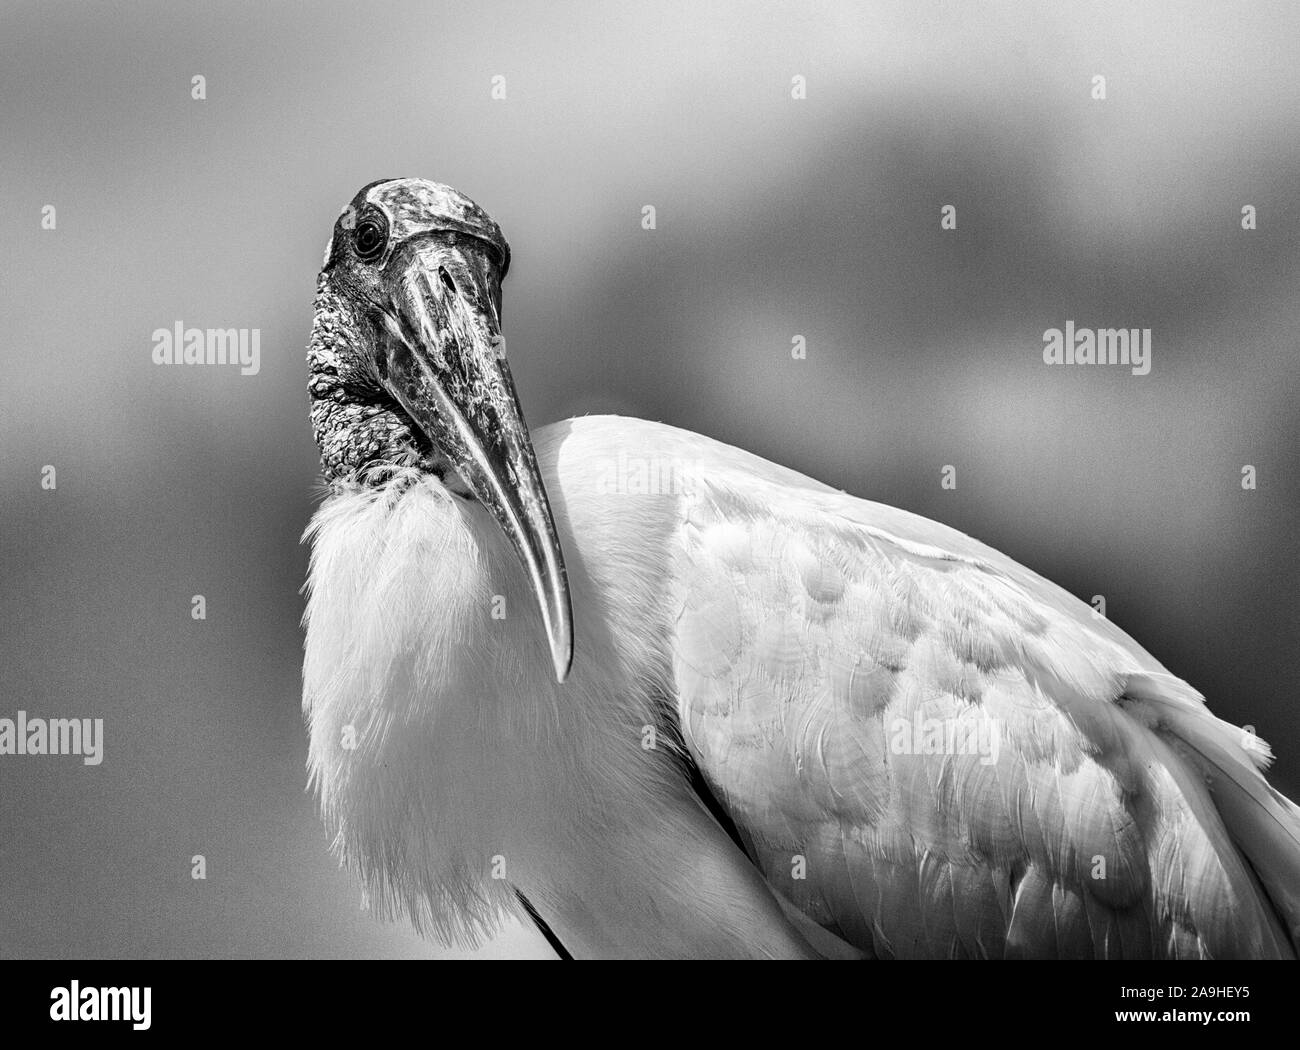 Adult Wood Stork Portrait - Black and White - inquisitive expression Stock Photo